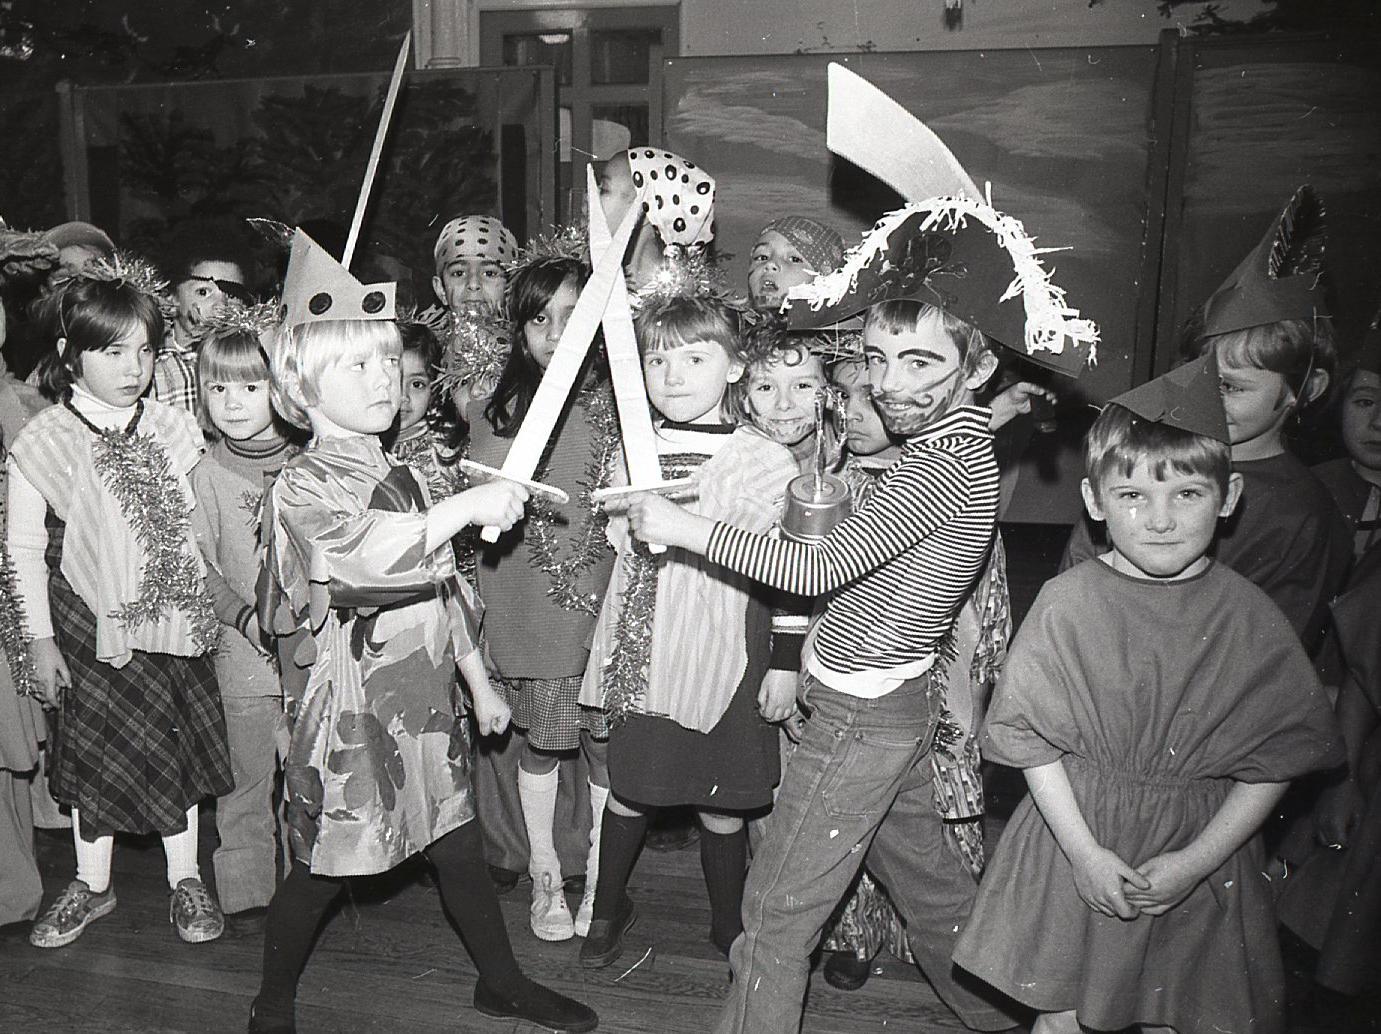 Peter Pan is 75 this year. And to commemorate the occasion, St Matthew's Infant school, Preston put on Peter Pan as its Christmas pantomime. In this picture, Peter Pan - George Nimmo, six, of Nevett Street, Preston - is seen in combat with his arch-enemy Captain Hook, played by six-year-old Mark Sloane, of Fishwick Parade, Preston